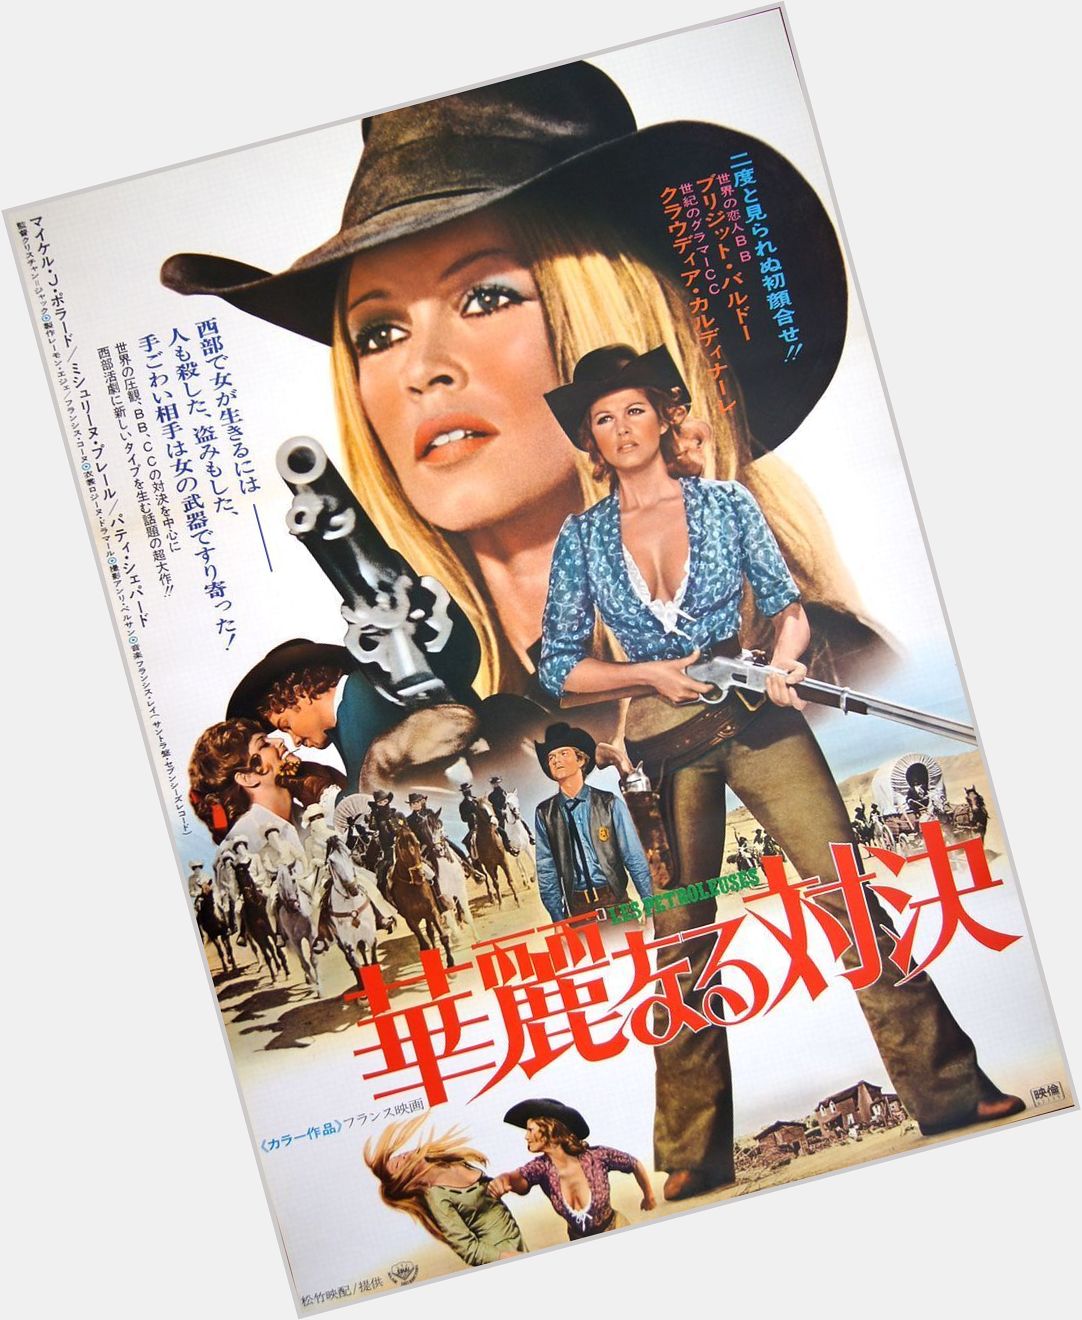 Happy birthday to Claudia Cardinale - LES PETROLEUSES - 1971 - Japanese release poster 